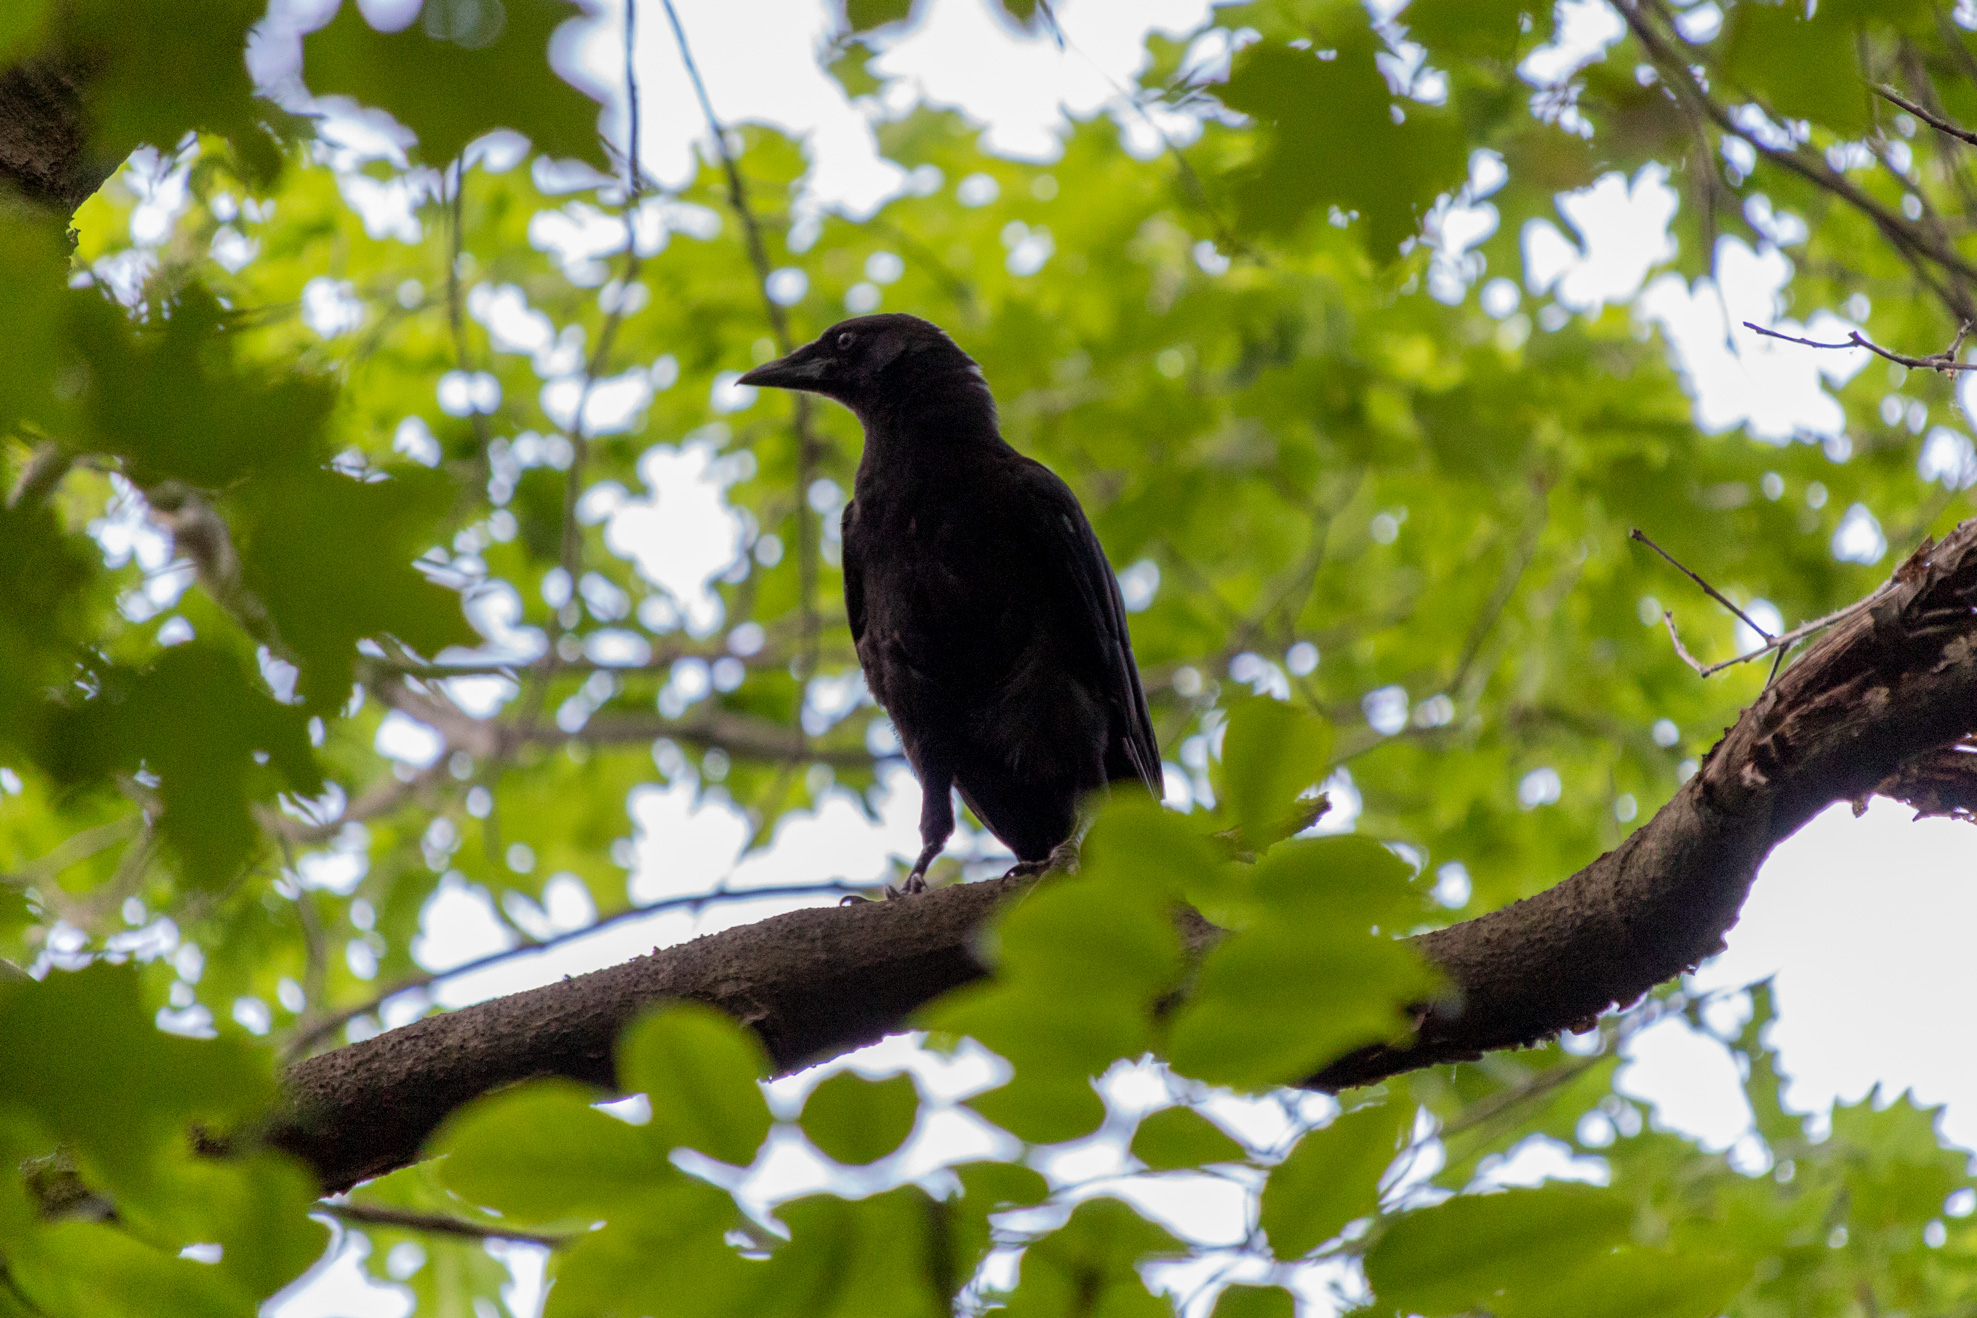 Crow standing on a tree brach looking majestic